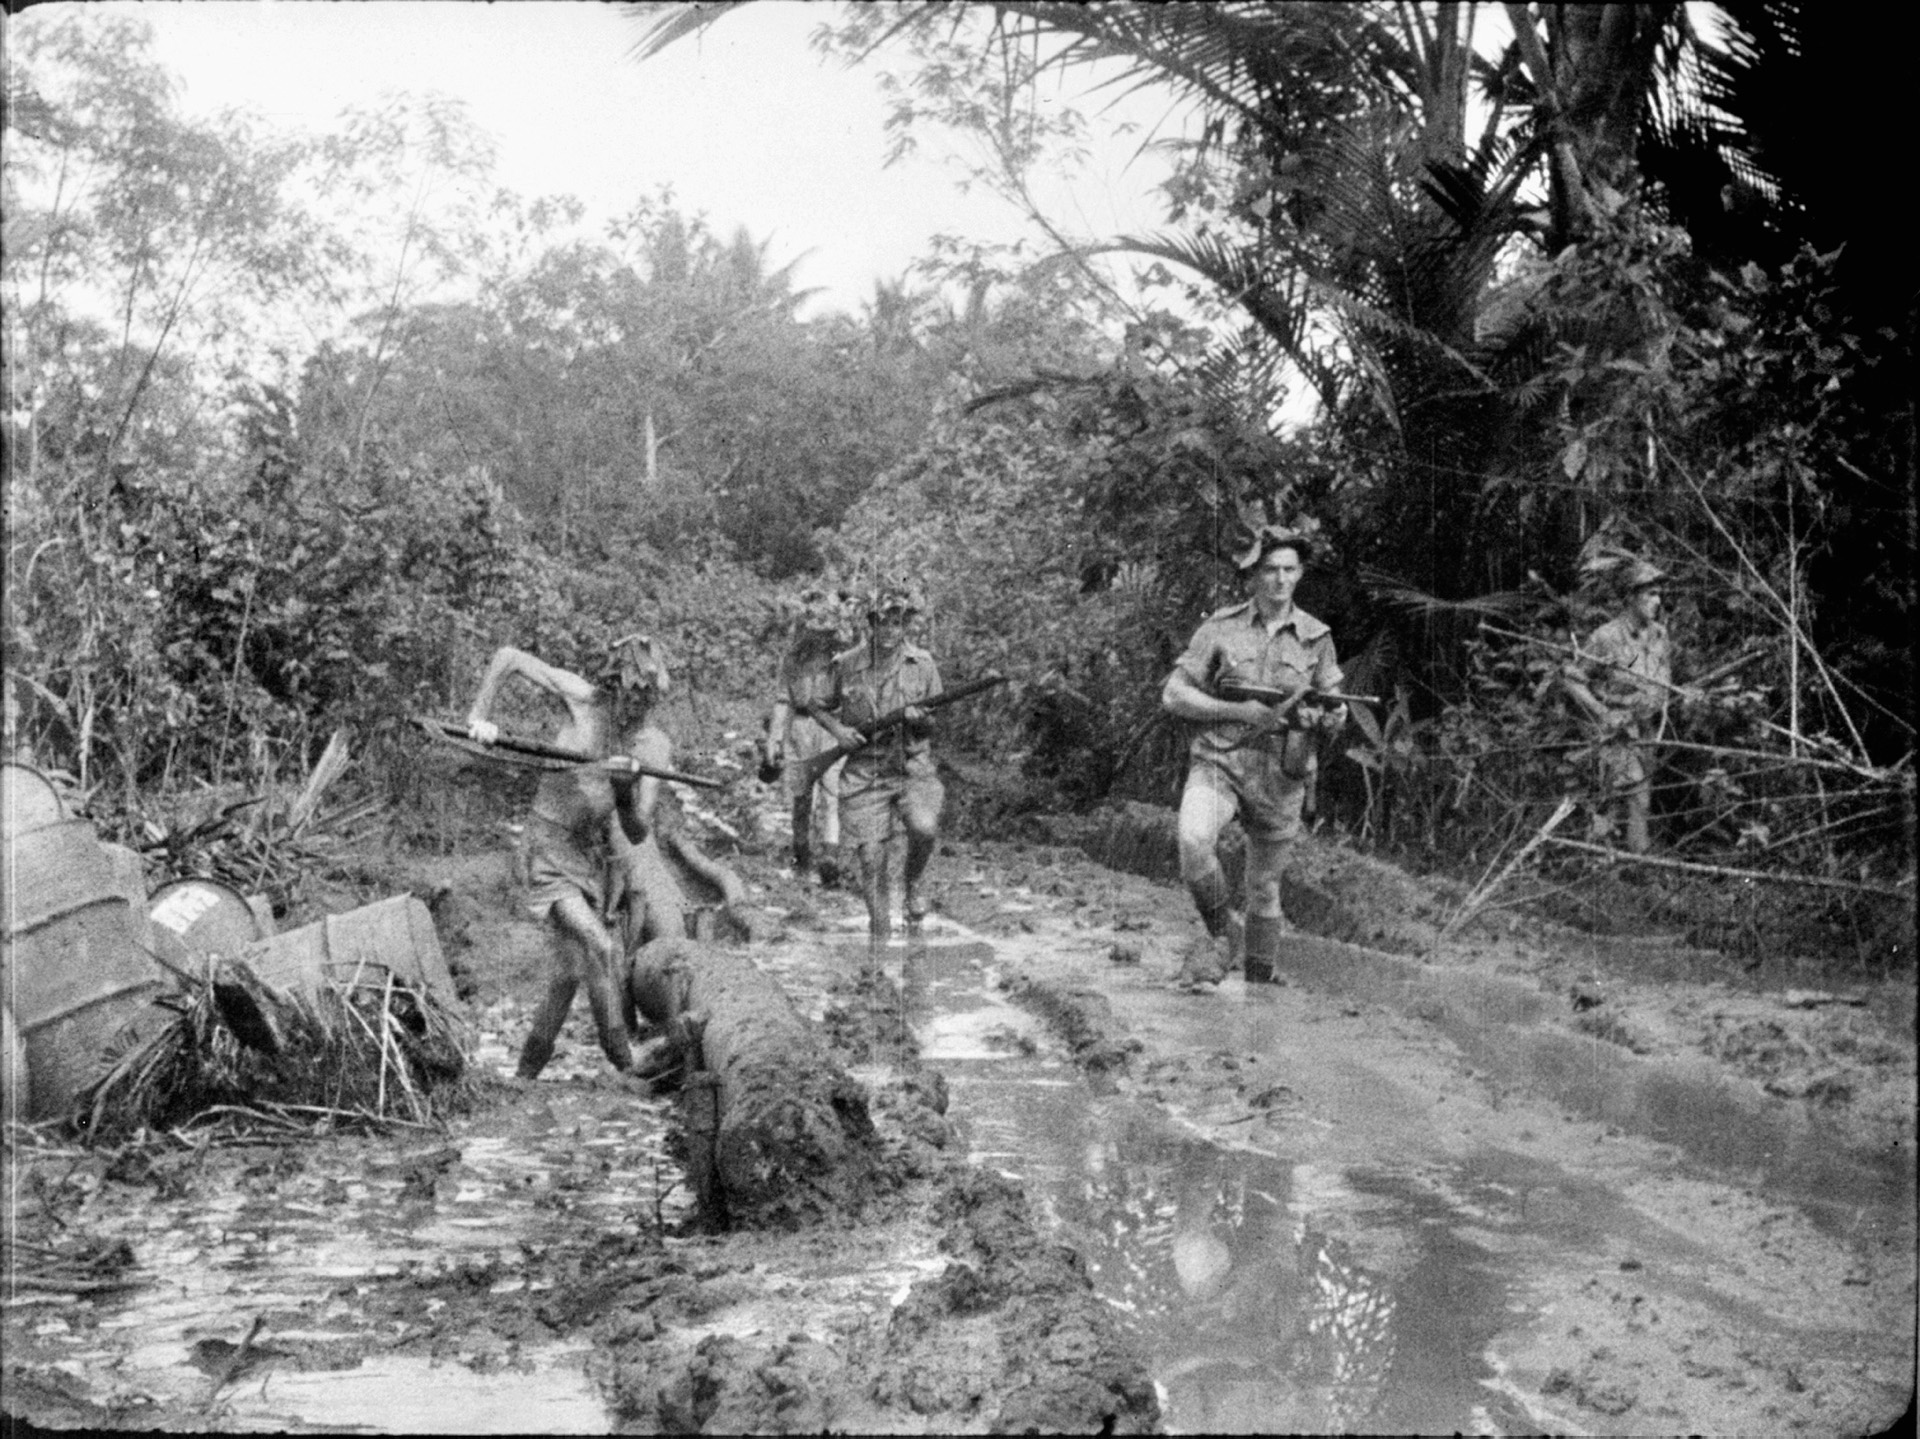 Australian troops, just coming off an unsuccessful engagement with Japanese infantry, slog their way through the mud in early October 1942.